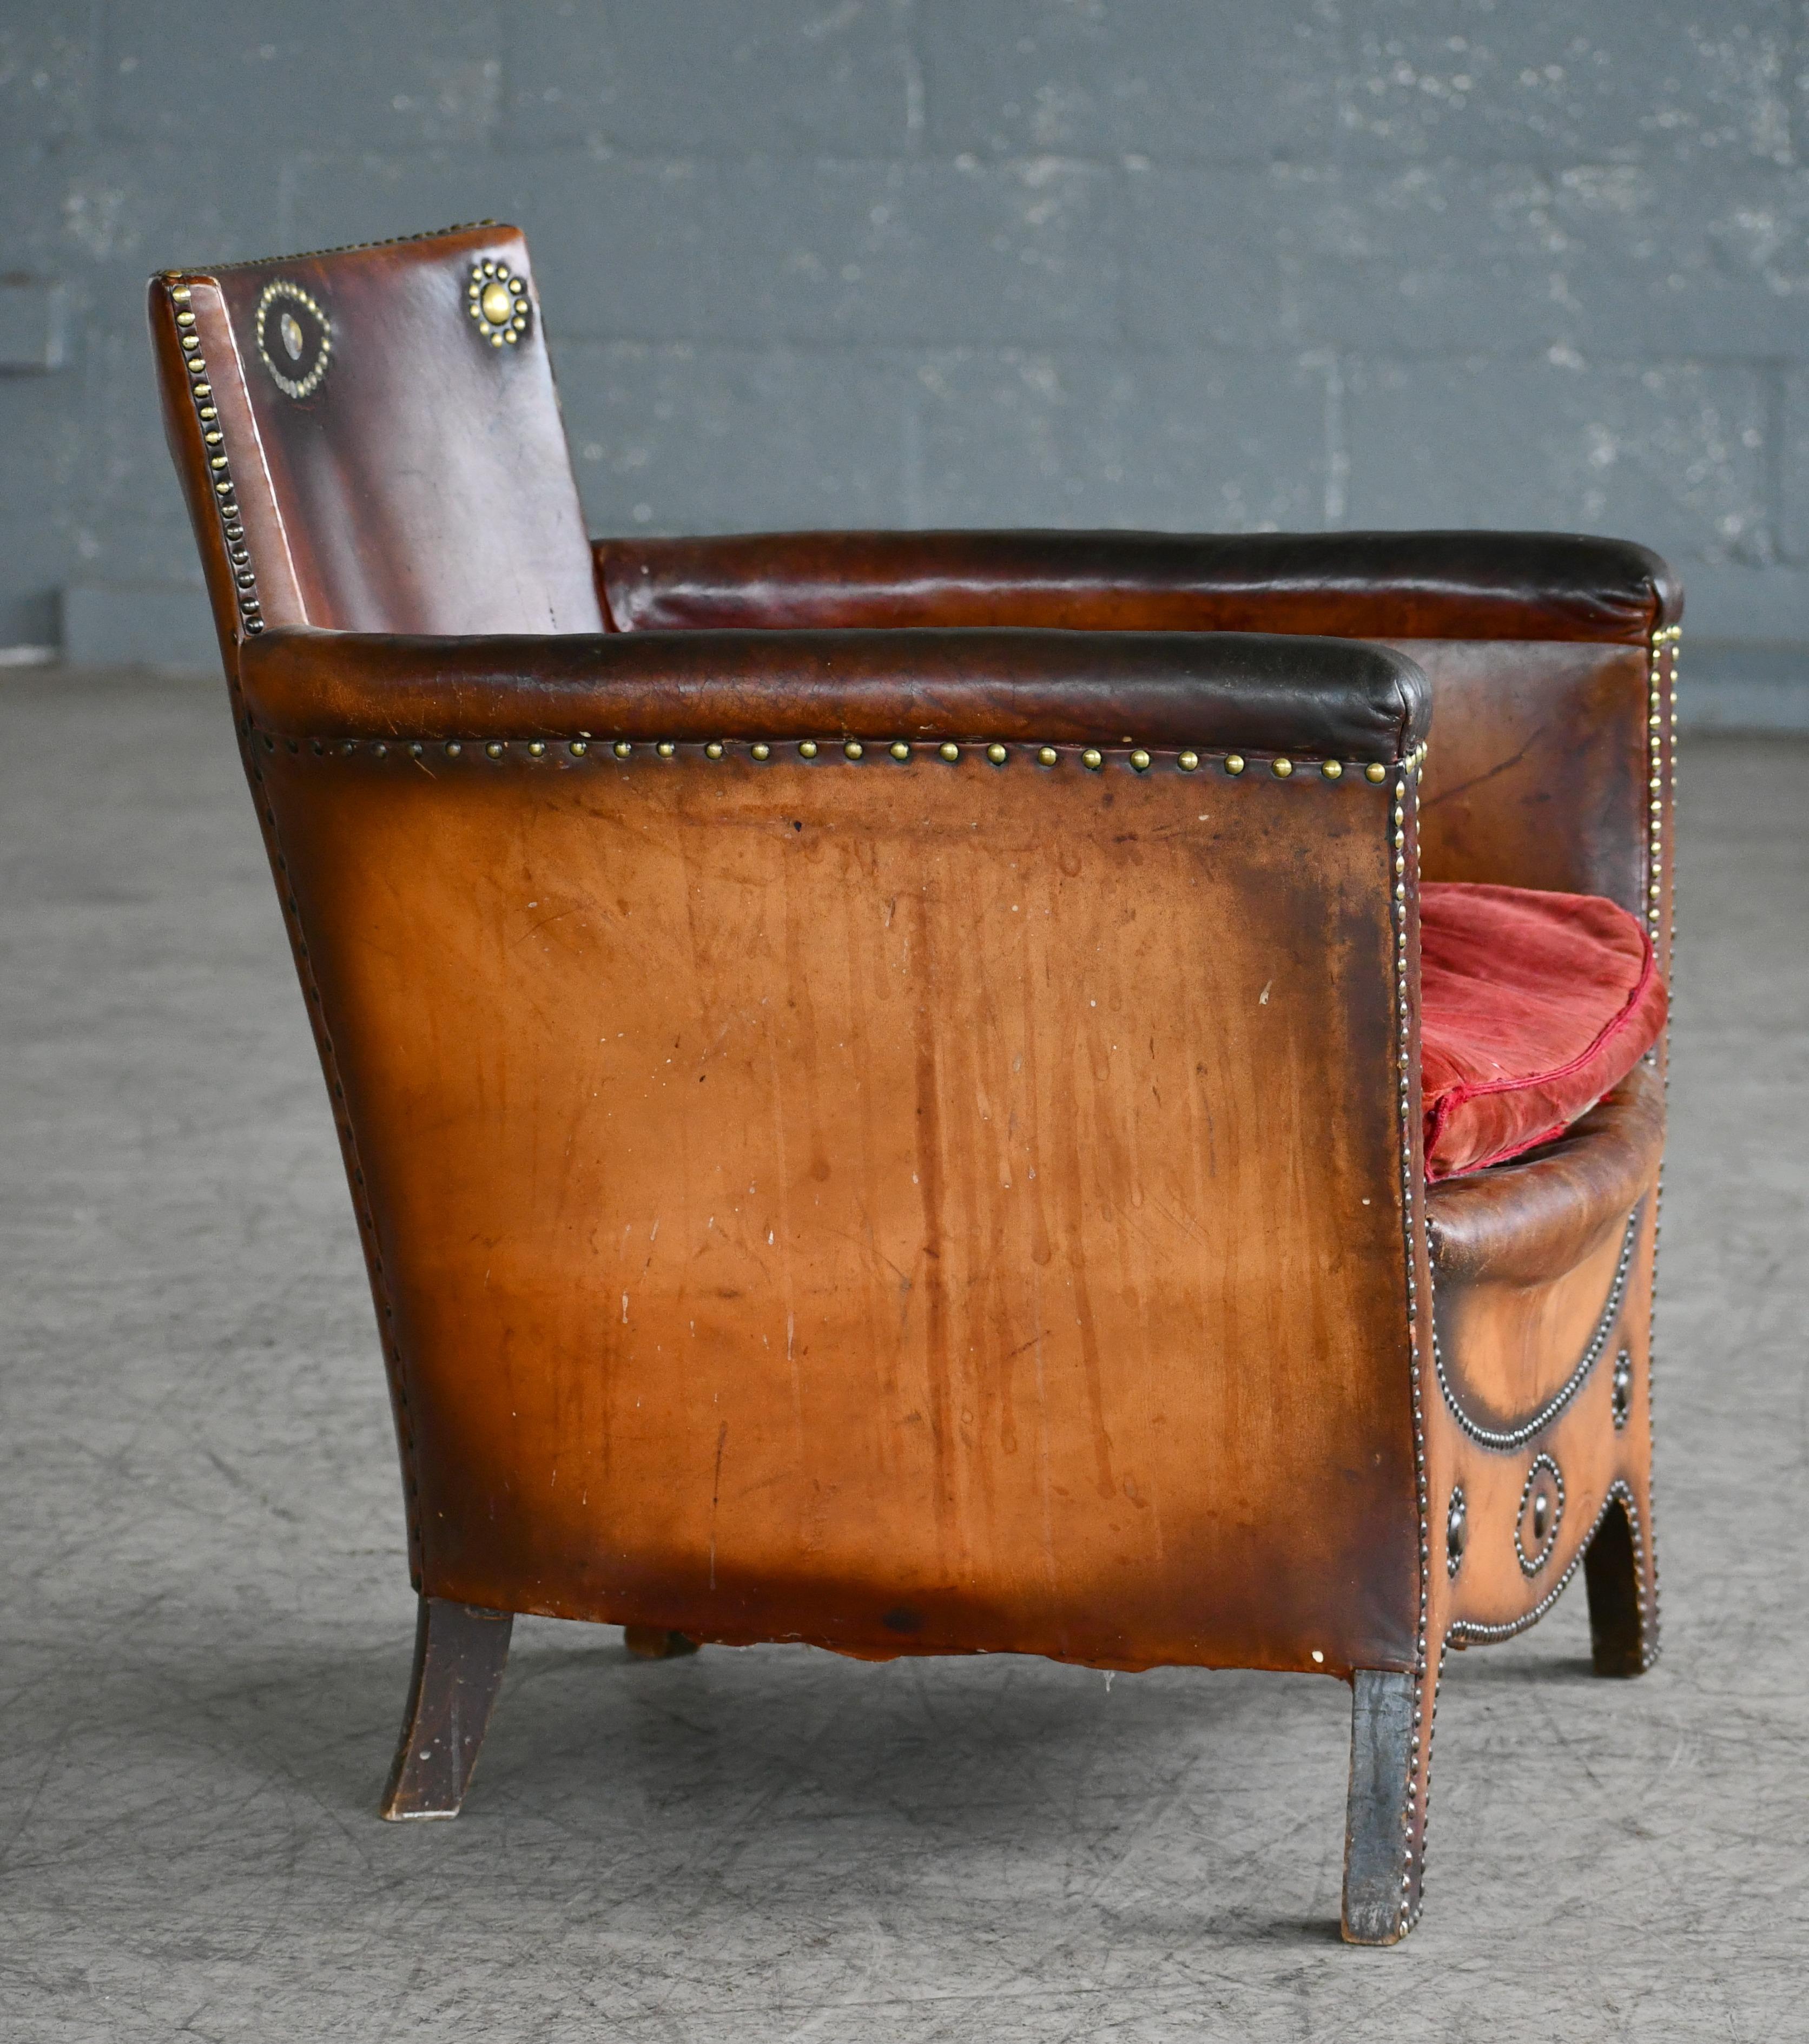 Swedish Otto Schulz 1940s Lounge Chair in Worn Leather for Boet, Scandinavian Midcentury